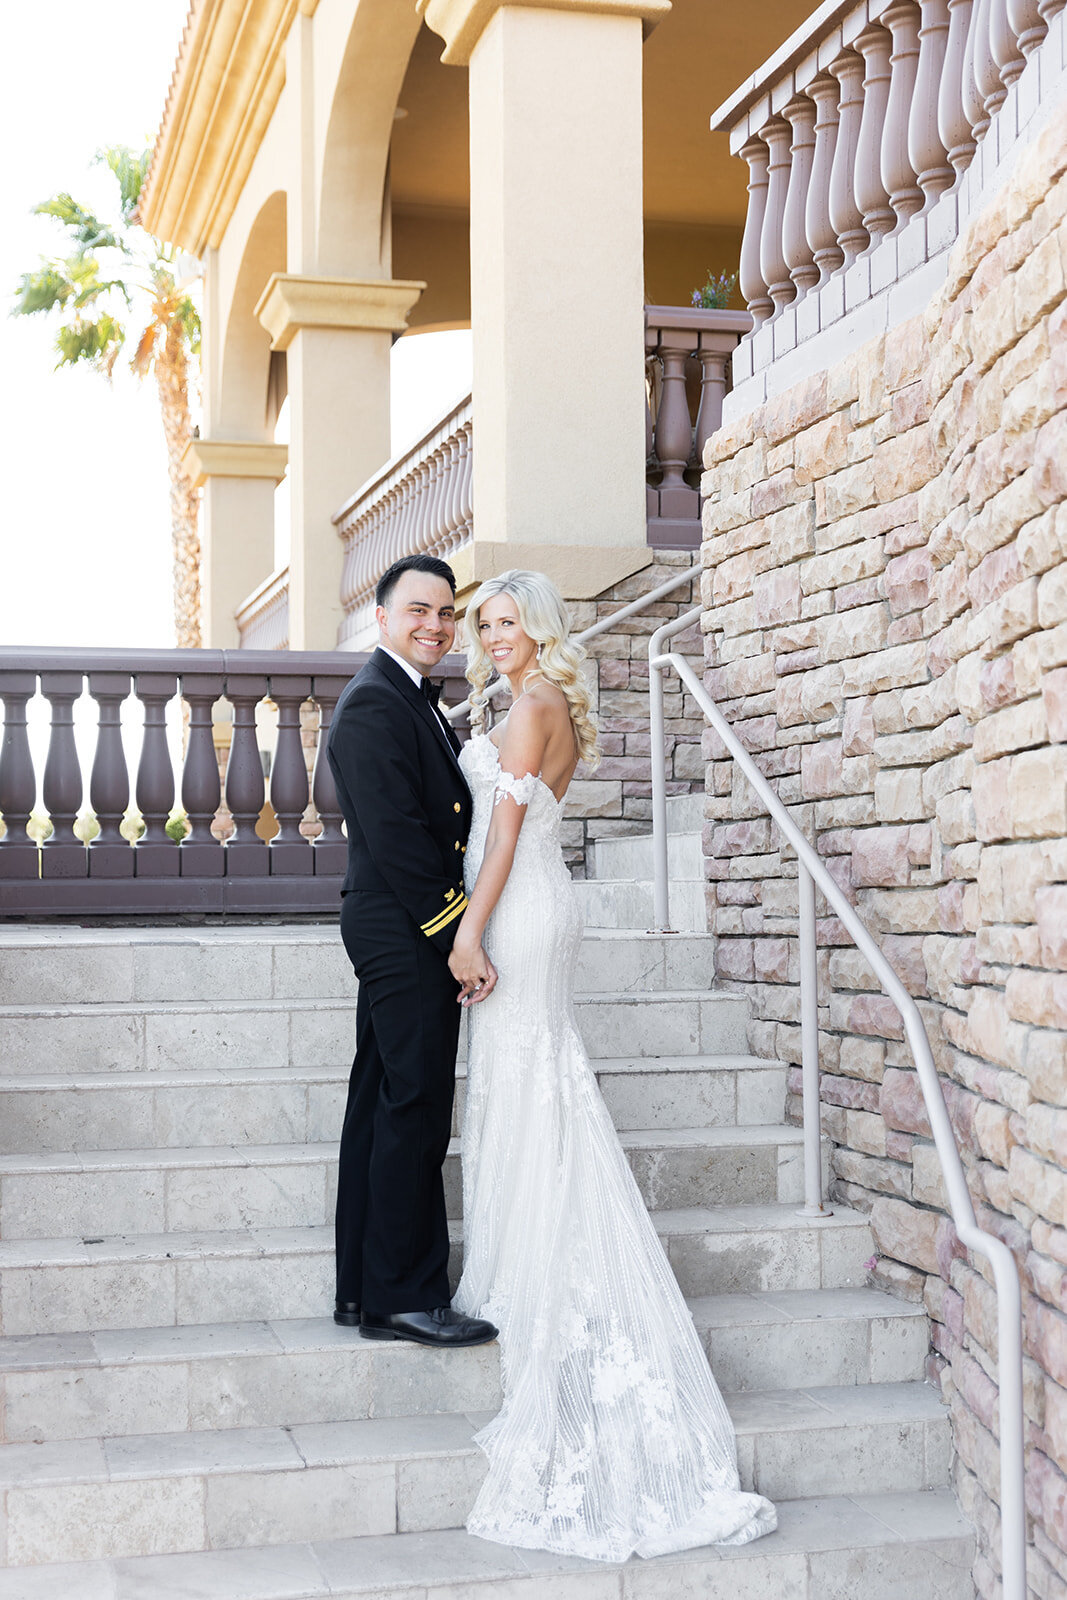 Karlie Colleen Photography - Holly & Ronnie Wedding - Seville Country Club - Gilbert Arizona-171